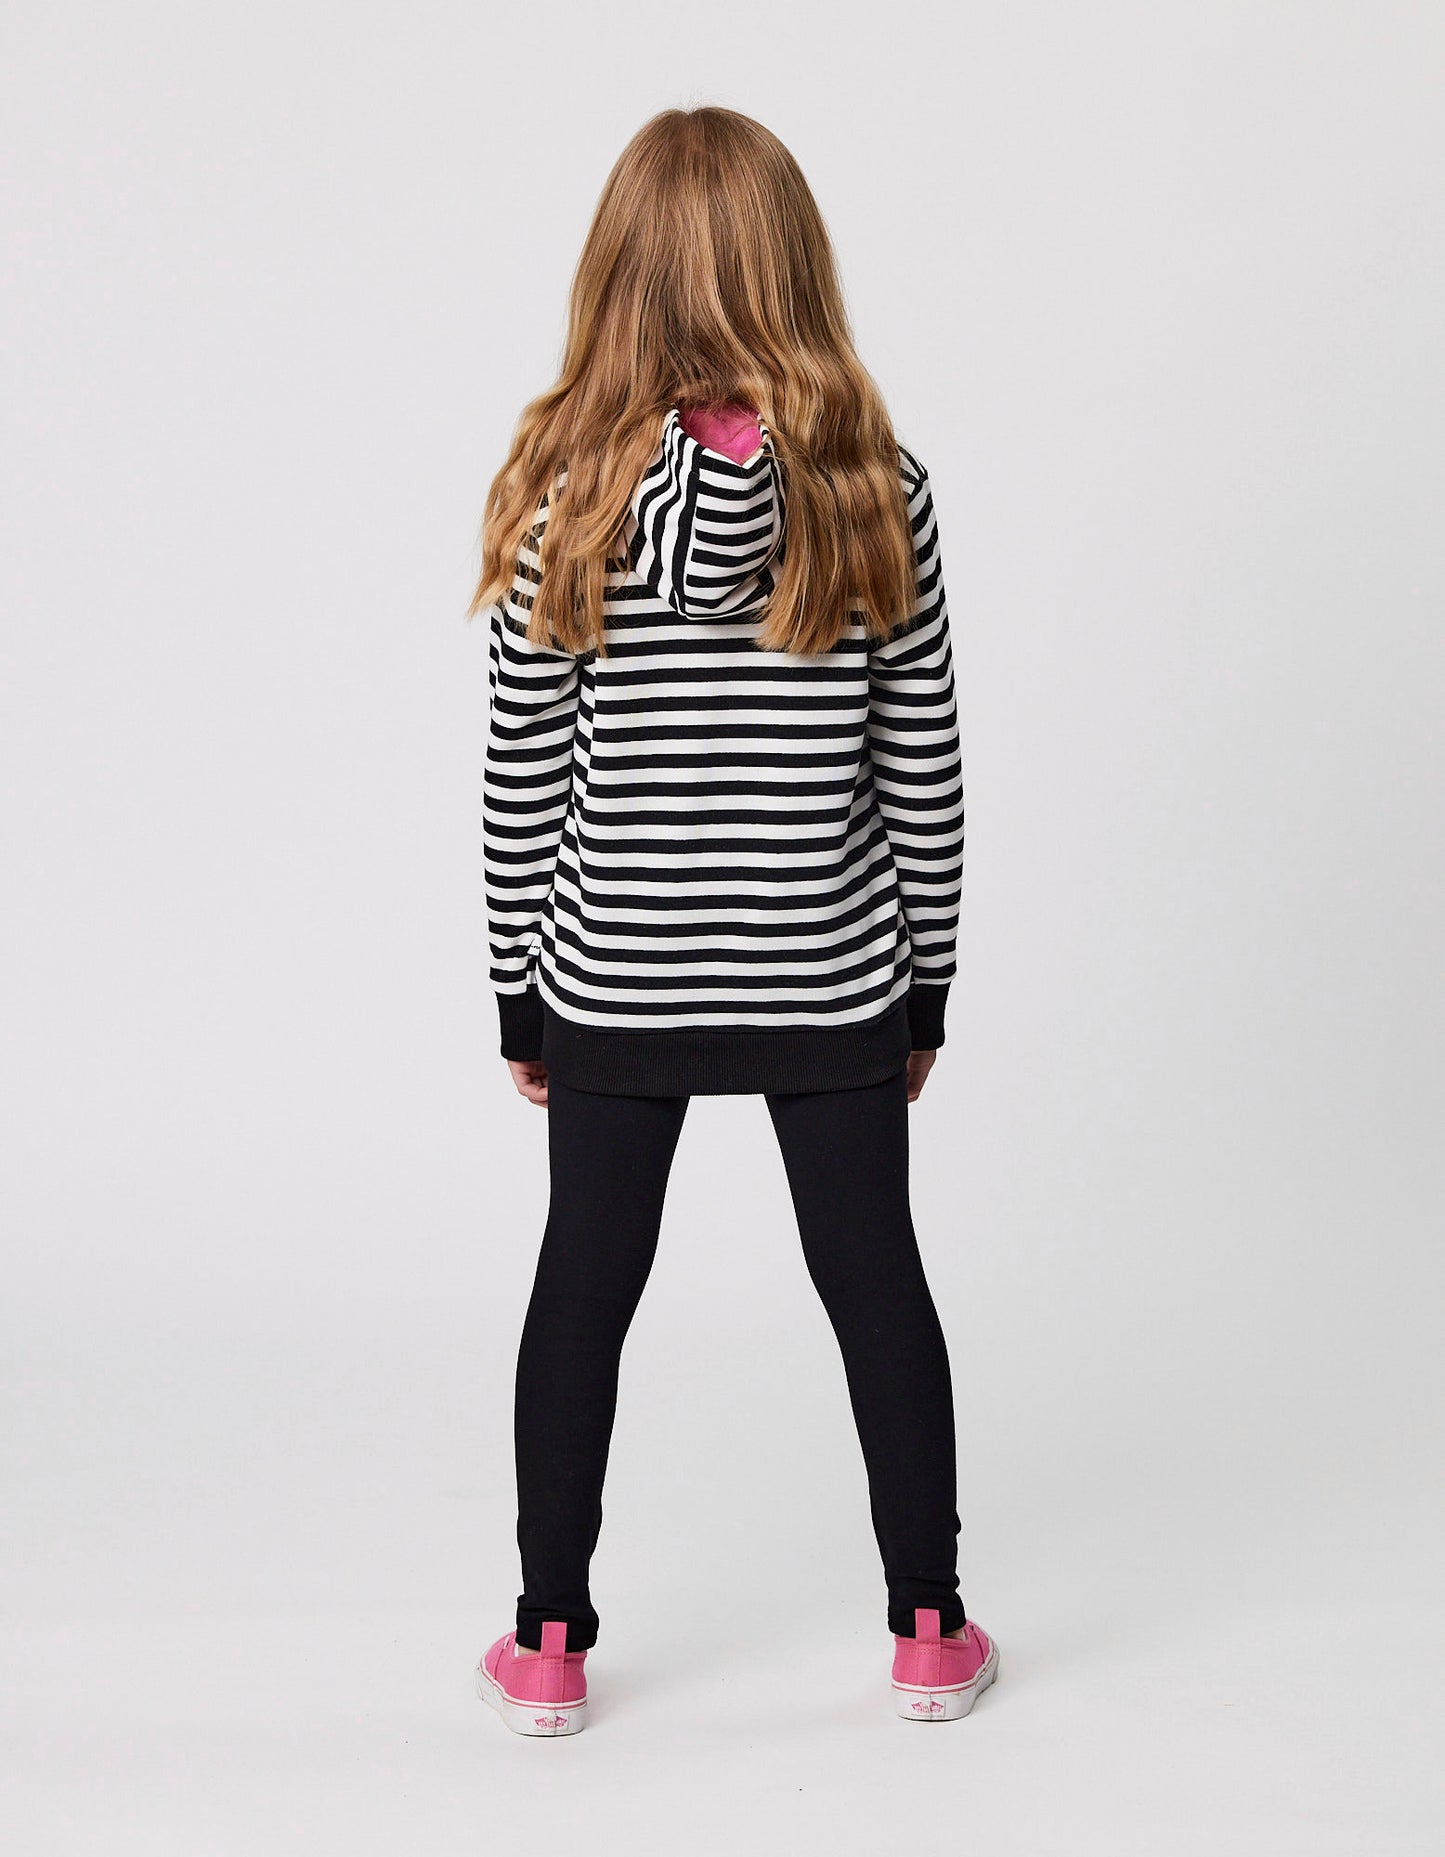 Kissed By Radicool Love Graffiti Hood in black and white stripes with pink printing from back